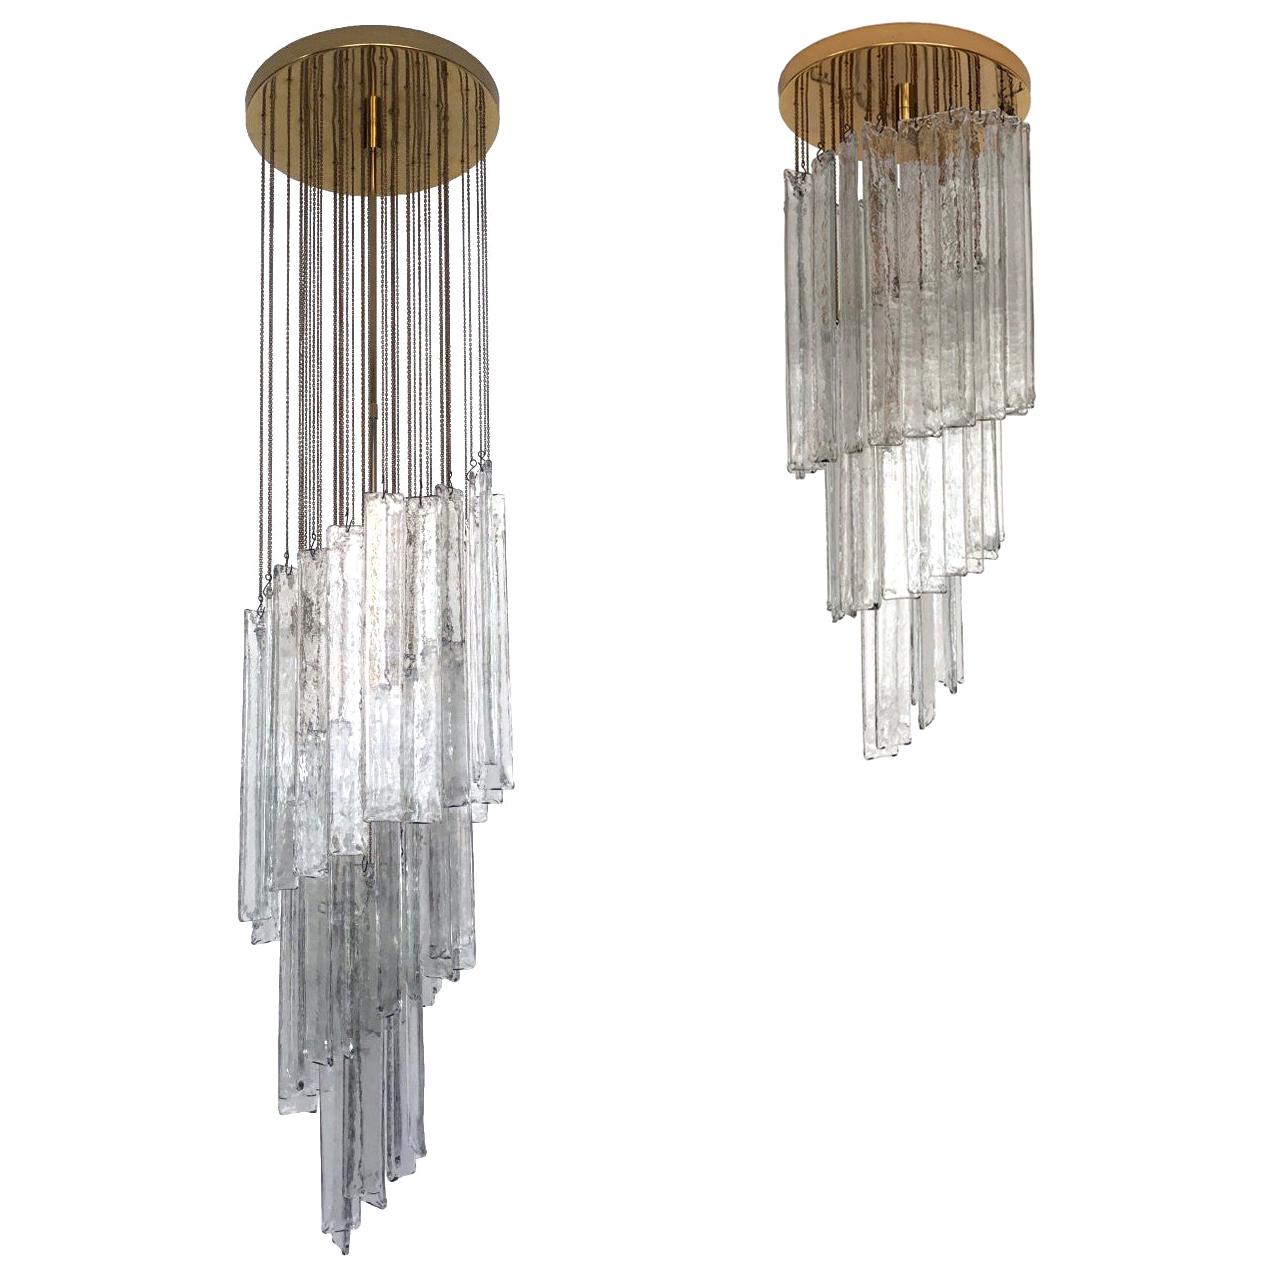 Set of two Italian Midcentury Clear Mazzega Murano Glass Chandeliers, 1970s